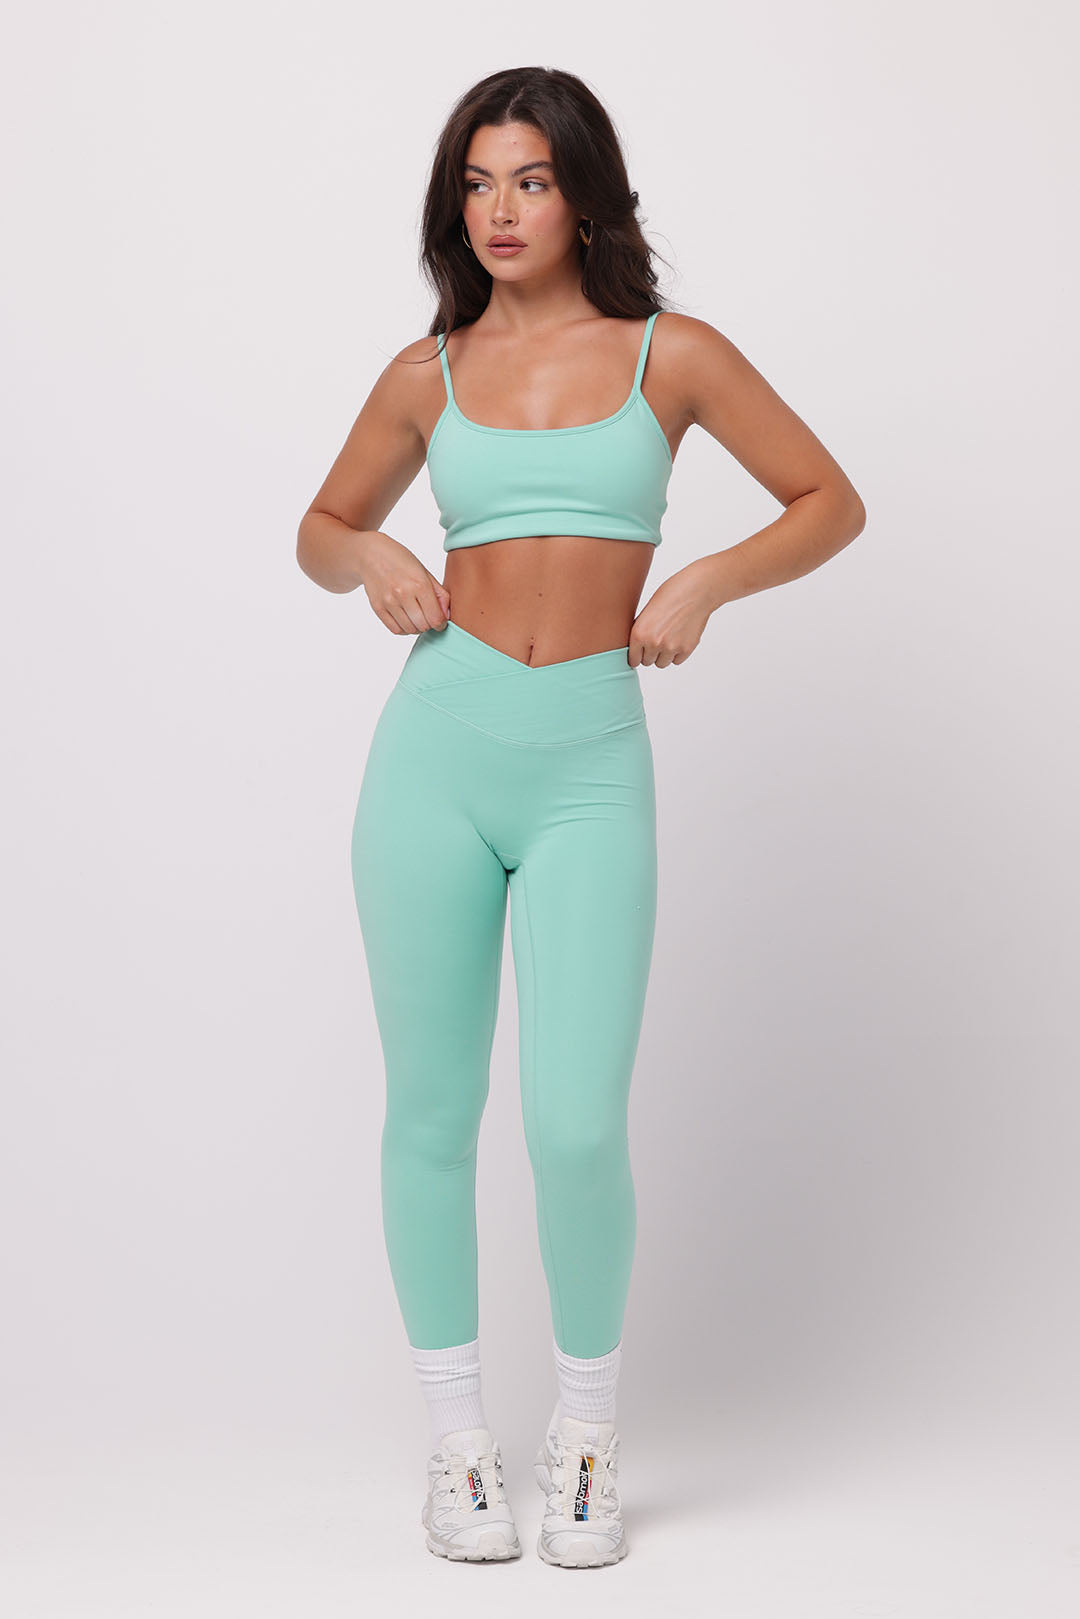 Athletic Leggings By Balance Collection Size: 1x – Clothes Mentor